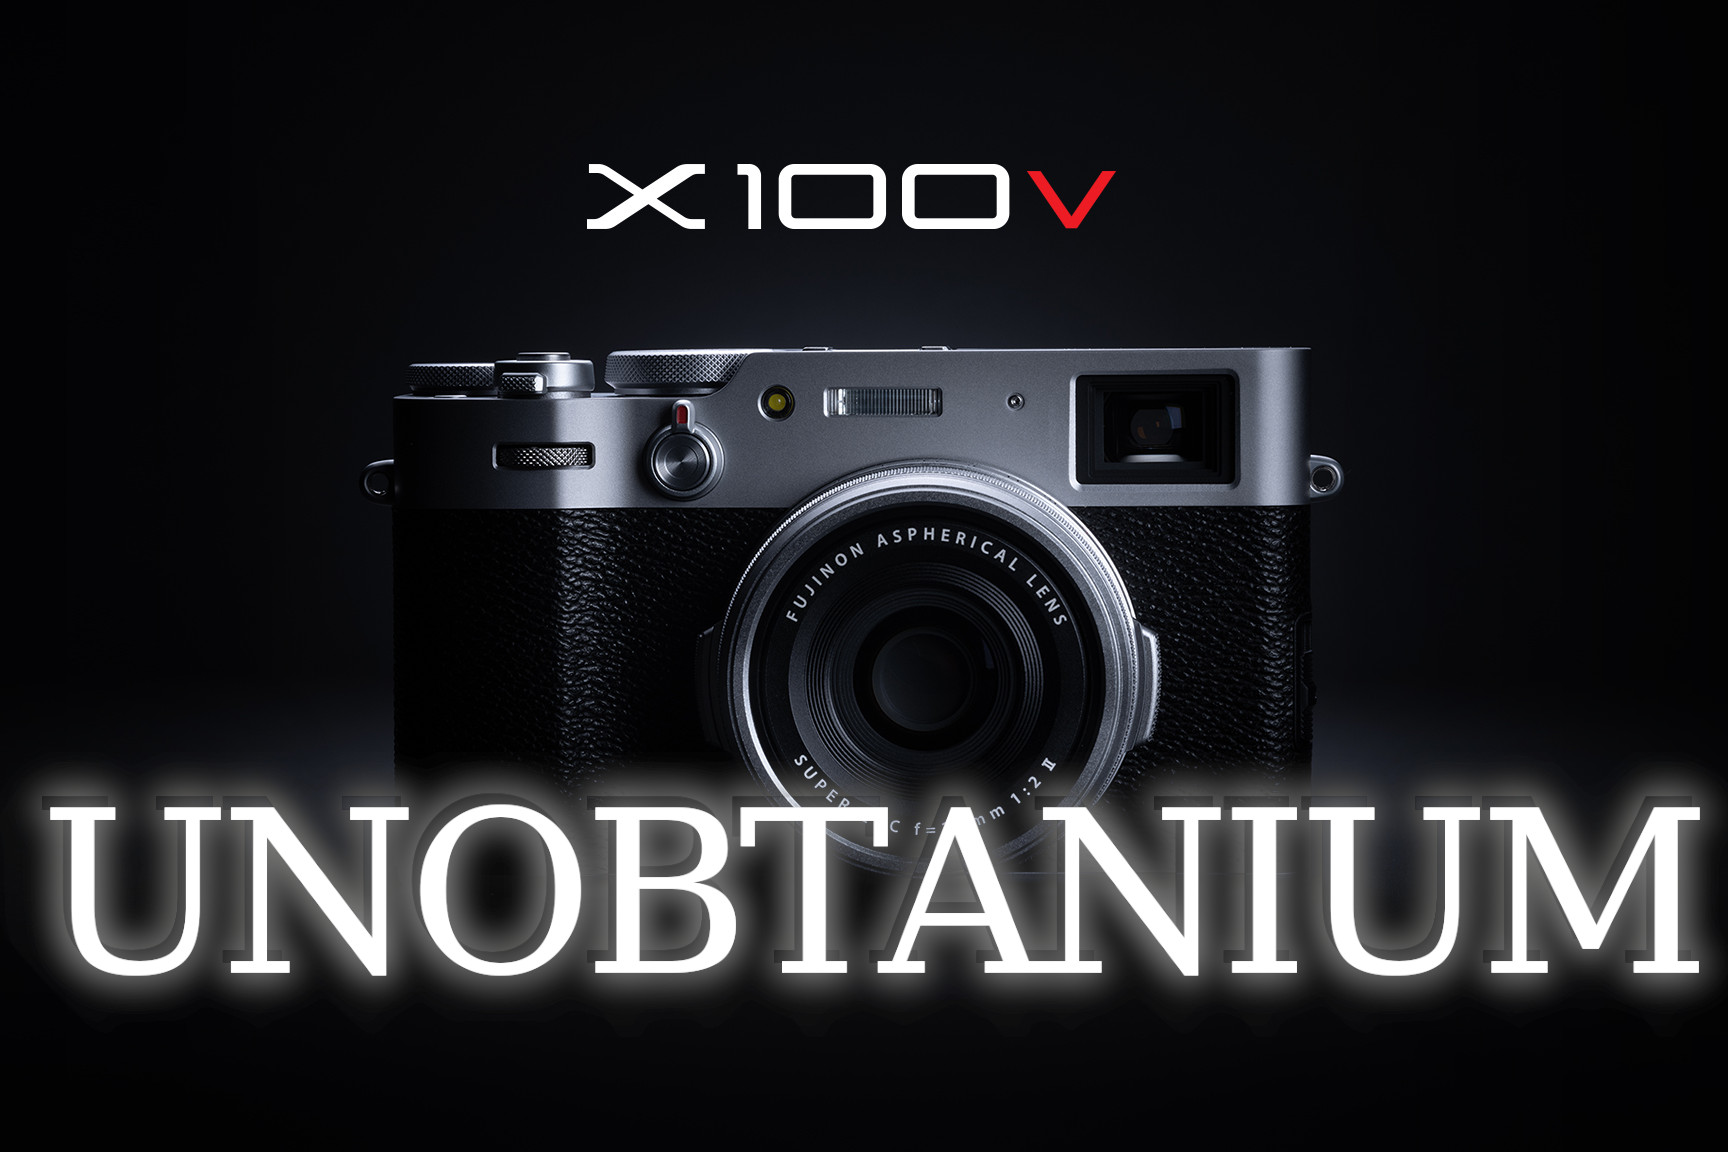 Fujifilm's X100V adds a new lens and tilting screen to a classic